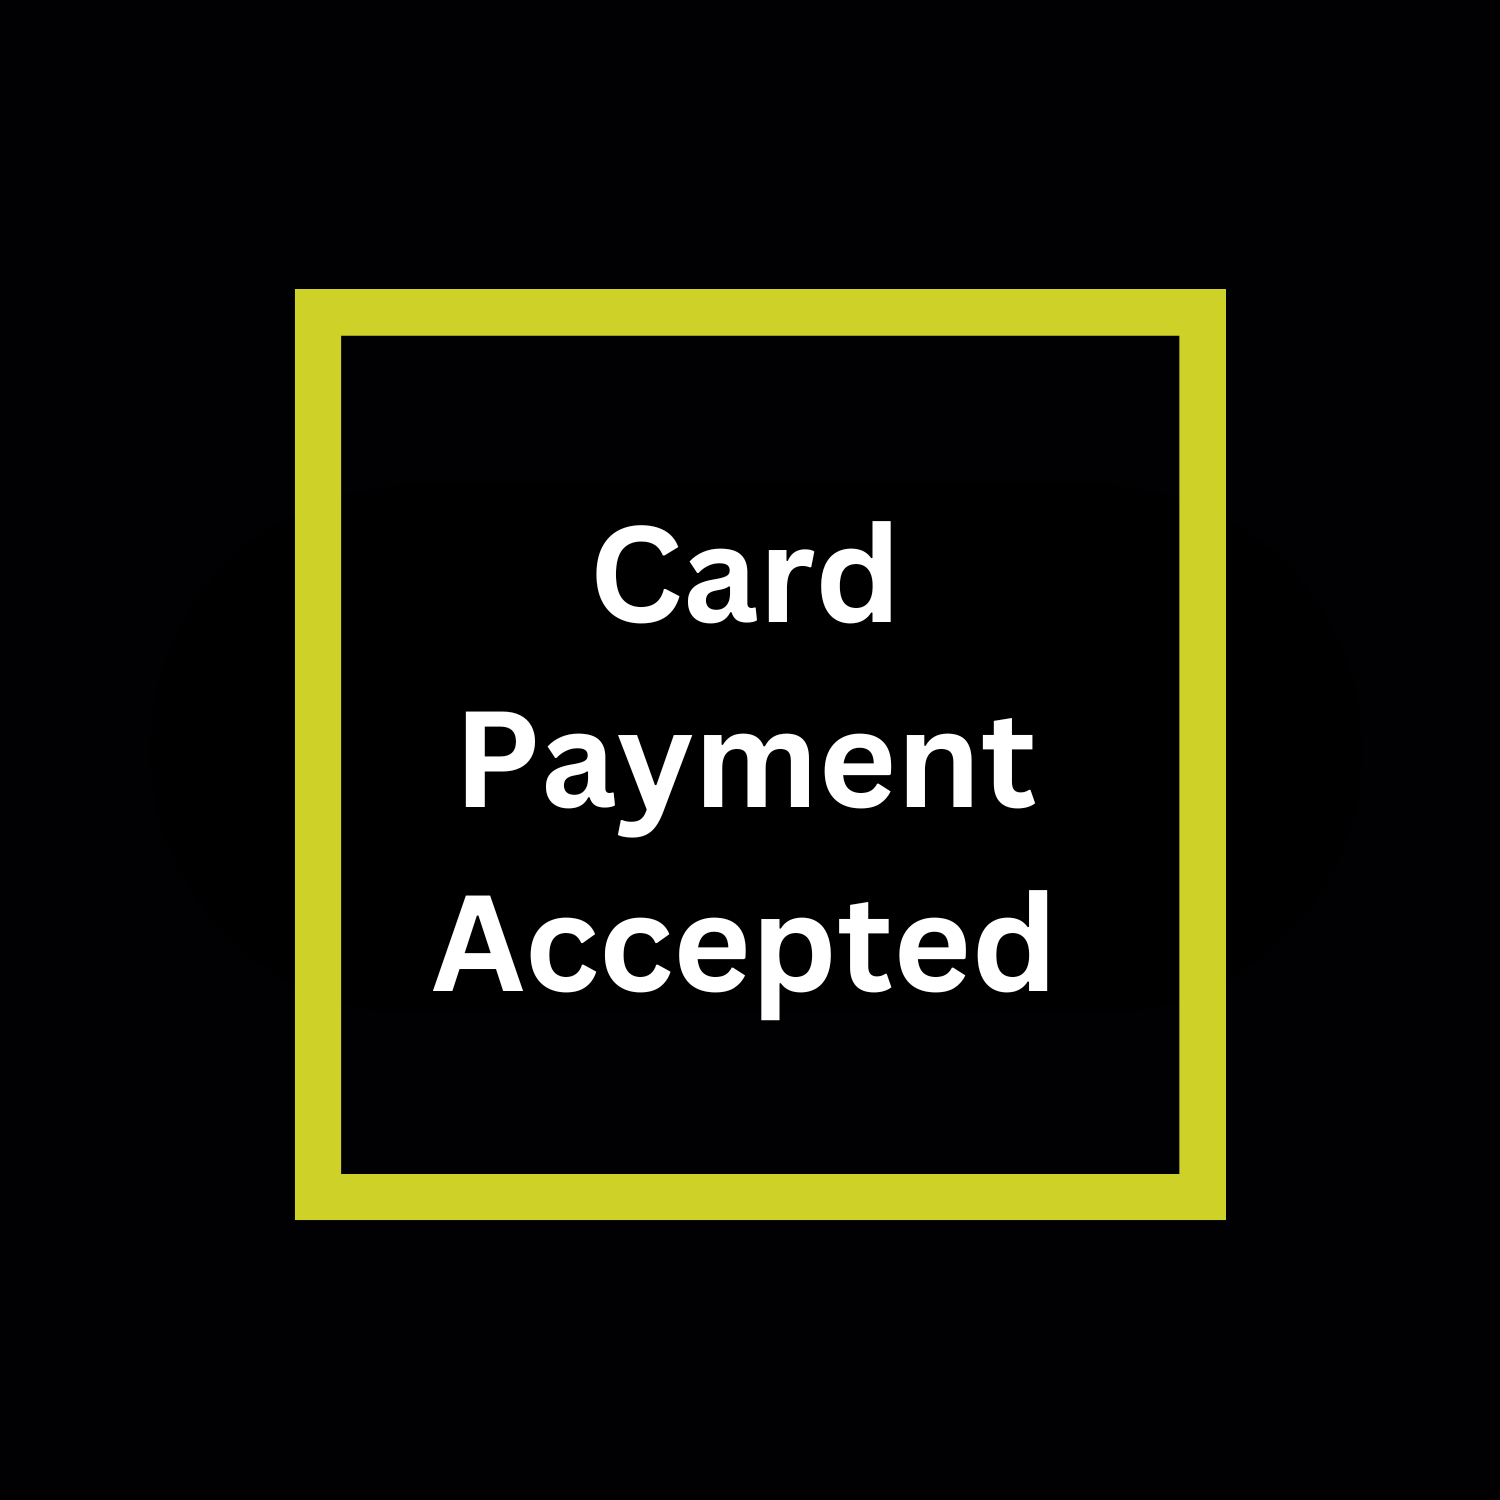 Card Payment Accepted